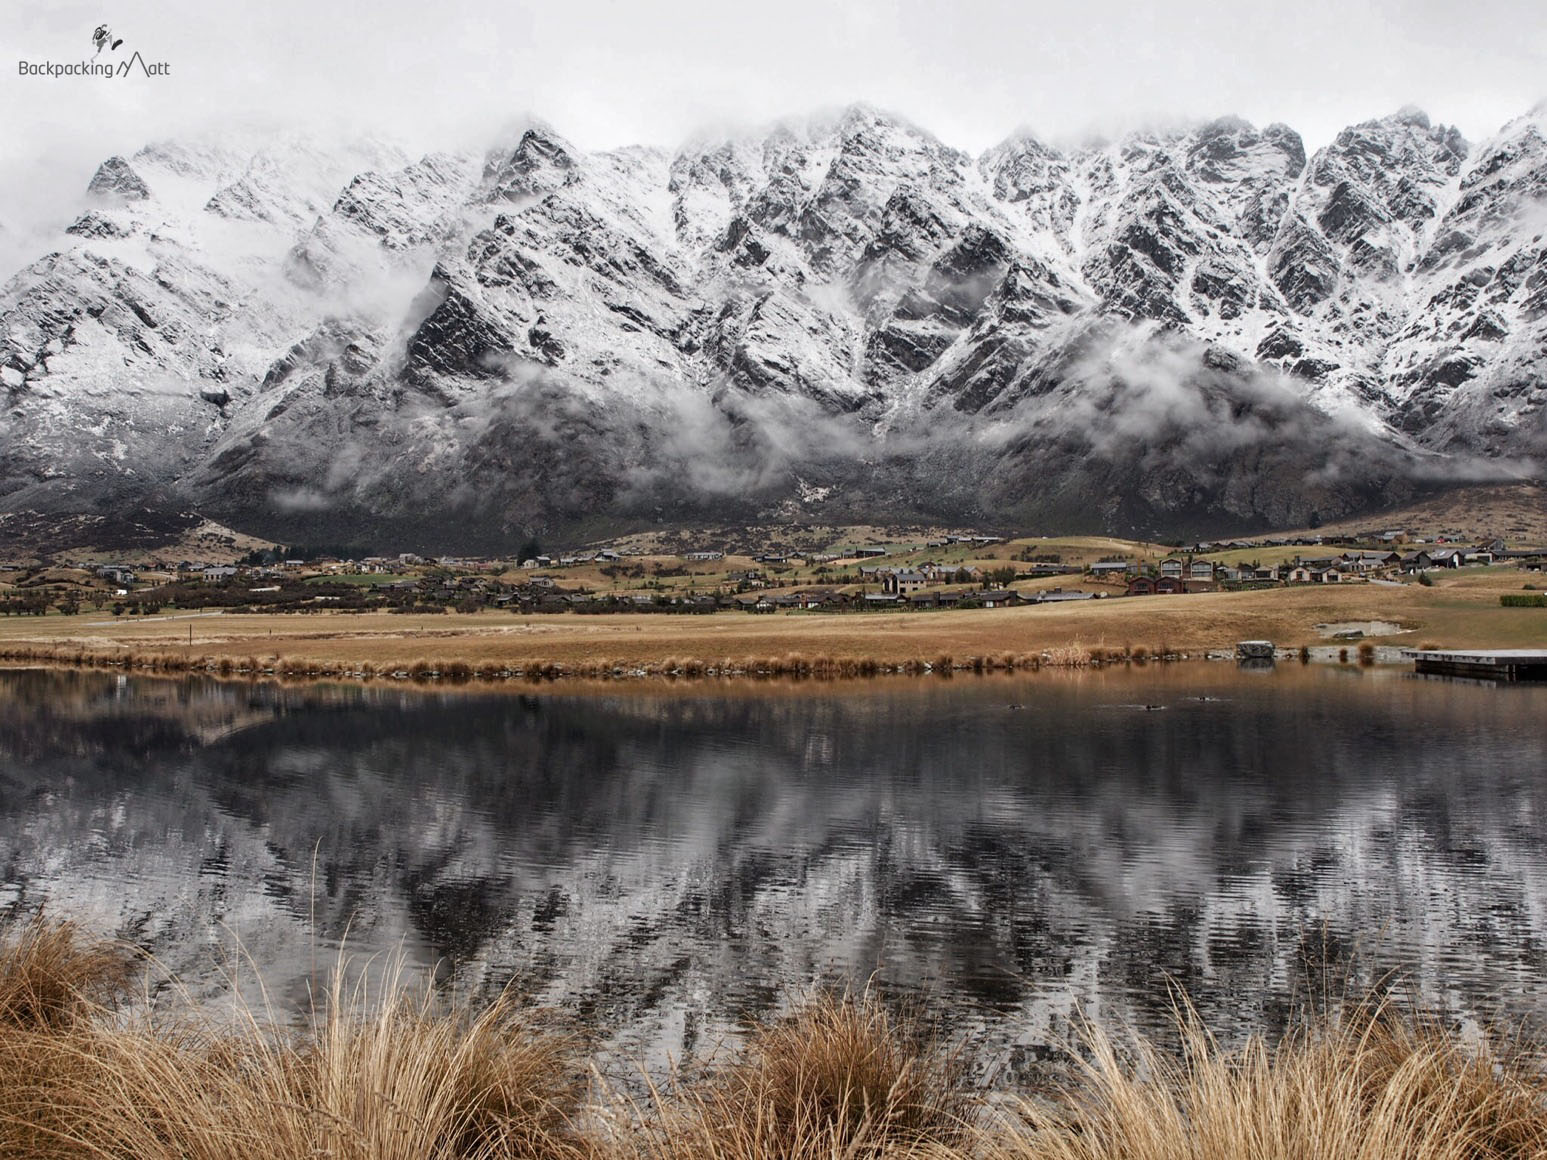 The Remarkables